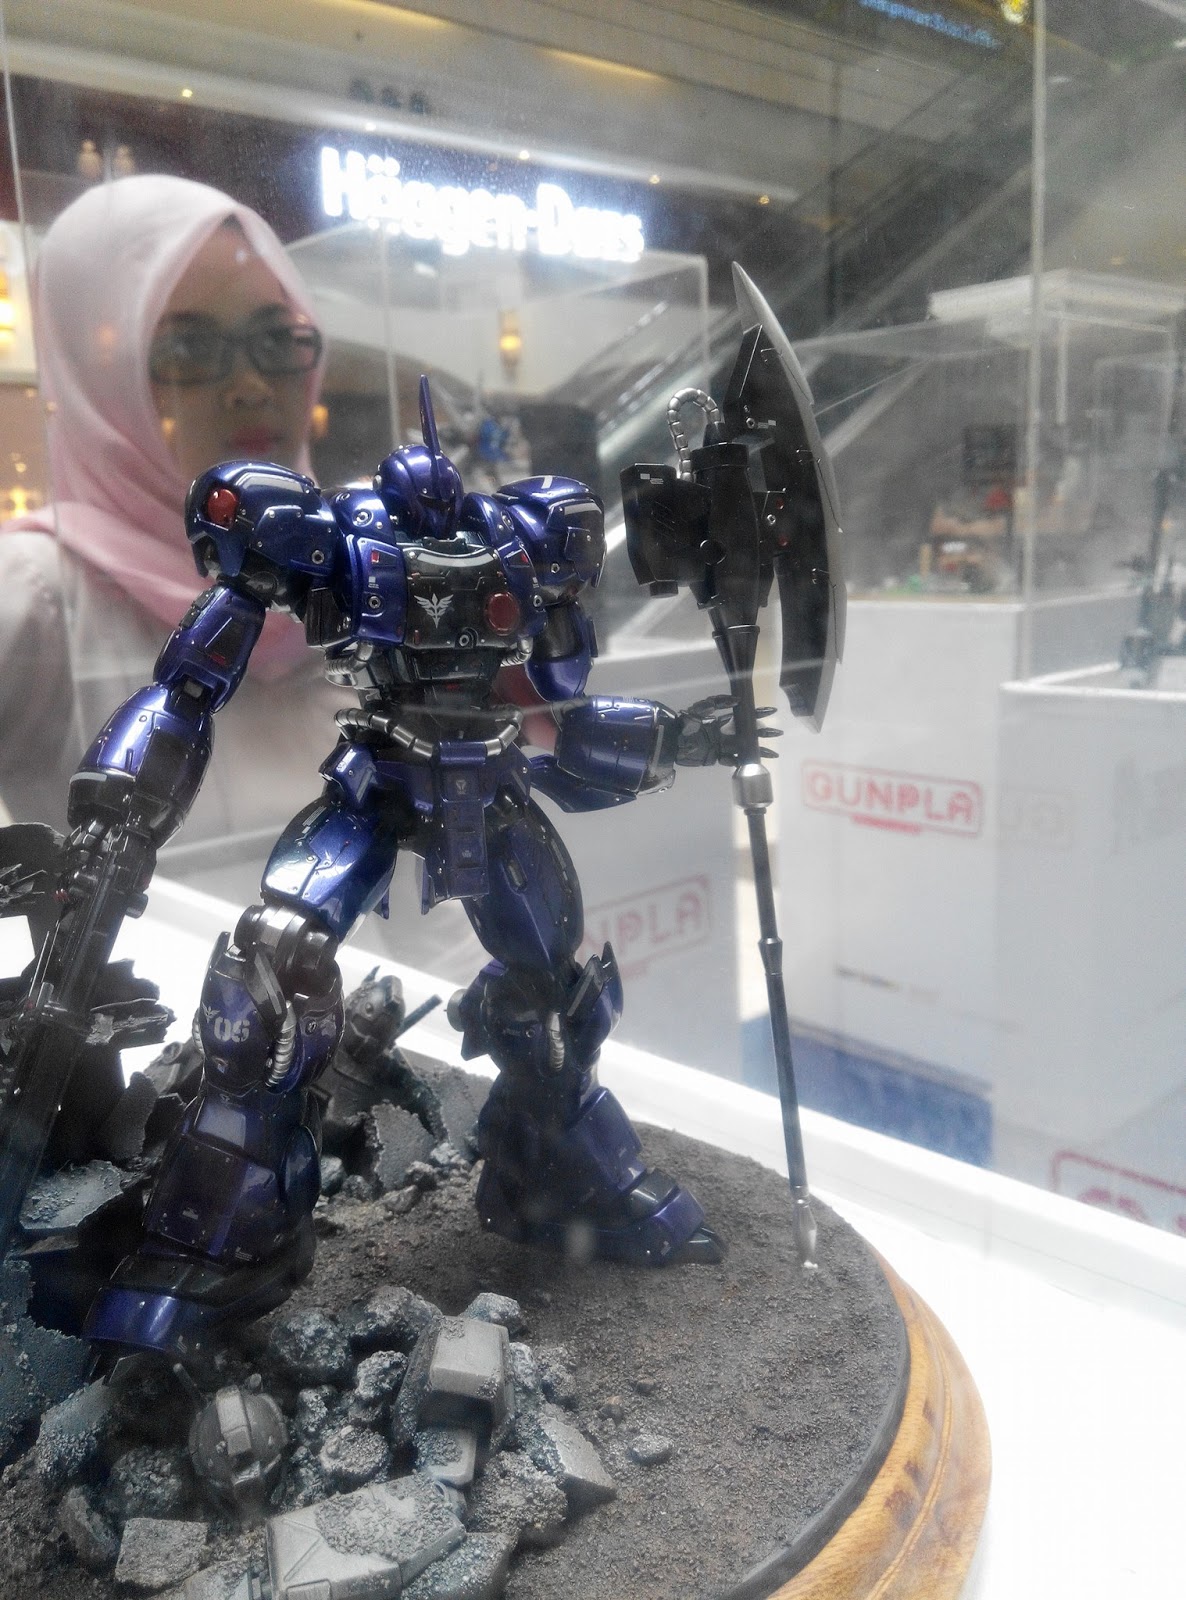 GunPla Builders World Cup [GBWC] 2016 Indonesia Image Gallery by 703 Workshop